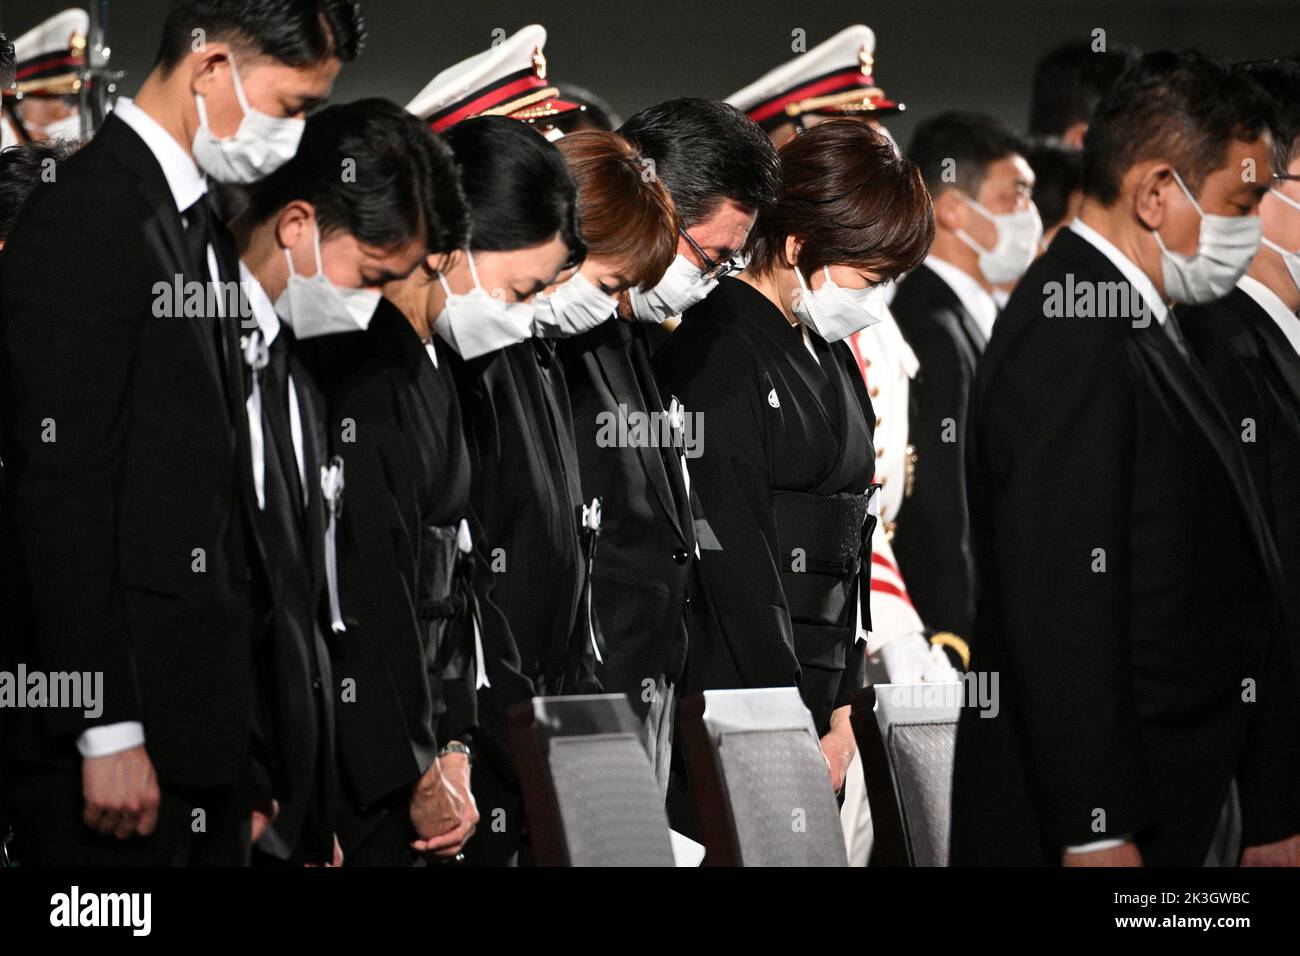 The widow of former Japanese prime minister Shinzo Abe, Akie Abe (centre R), bows her head with others for a moment of silence during his state funeral at the Nippon Budokan in Tokyo on September 27, 2022. PHILIP FONG/Pool via REUTERS Stock Photo